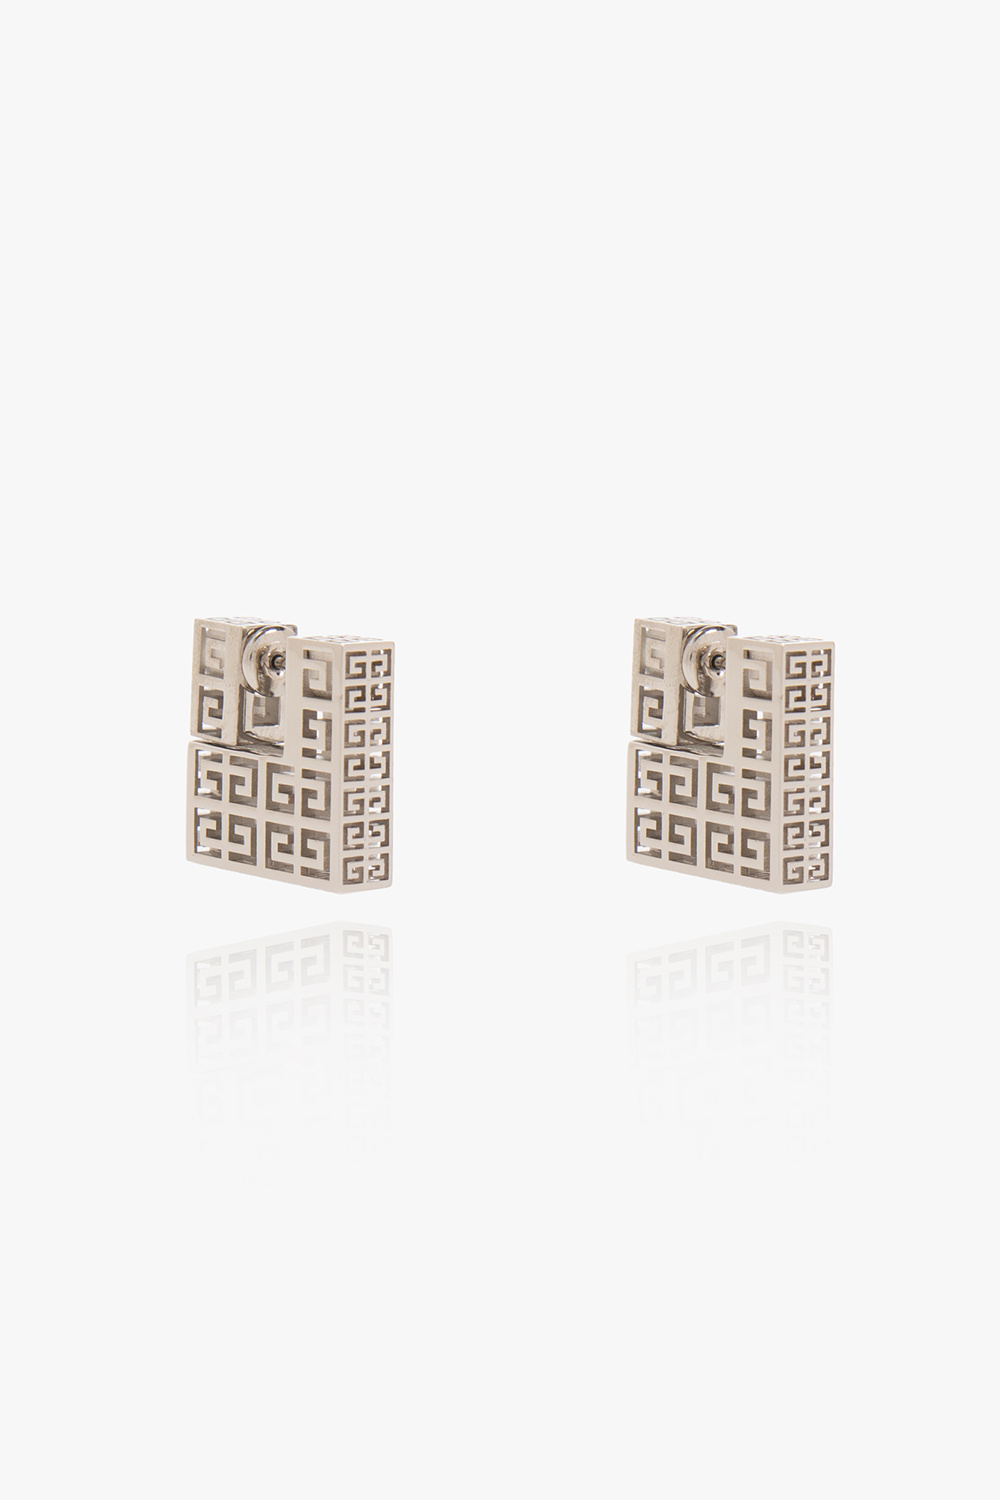 givenchy print ‘G Square’ earrings